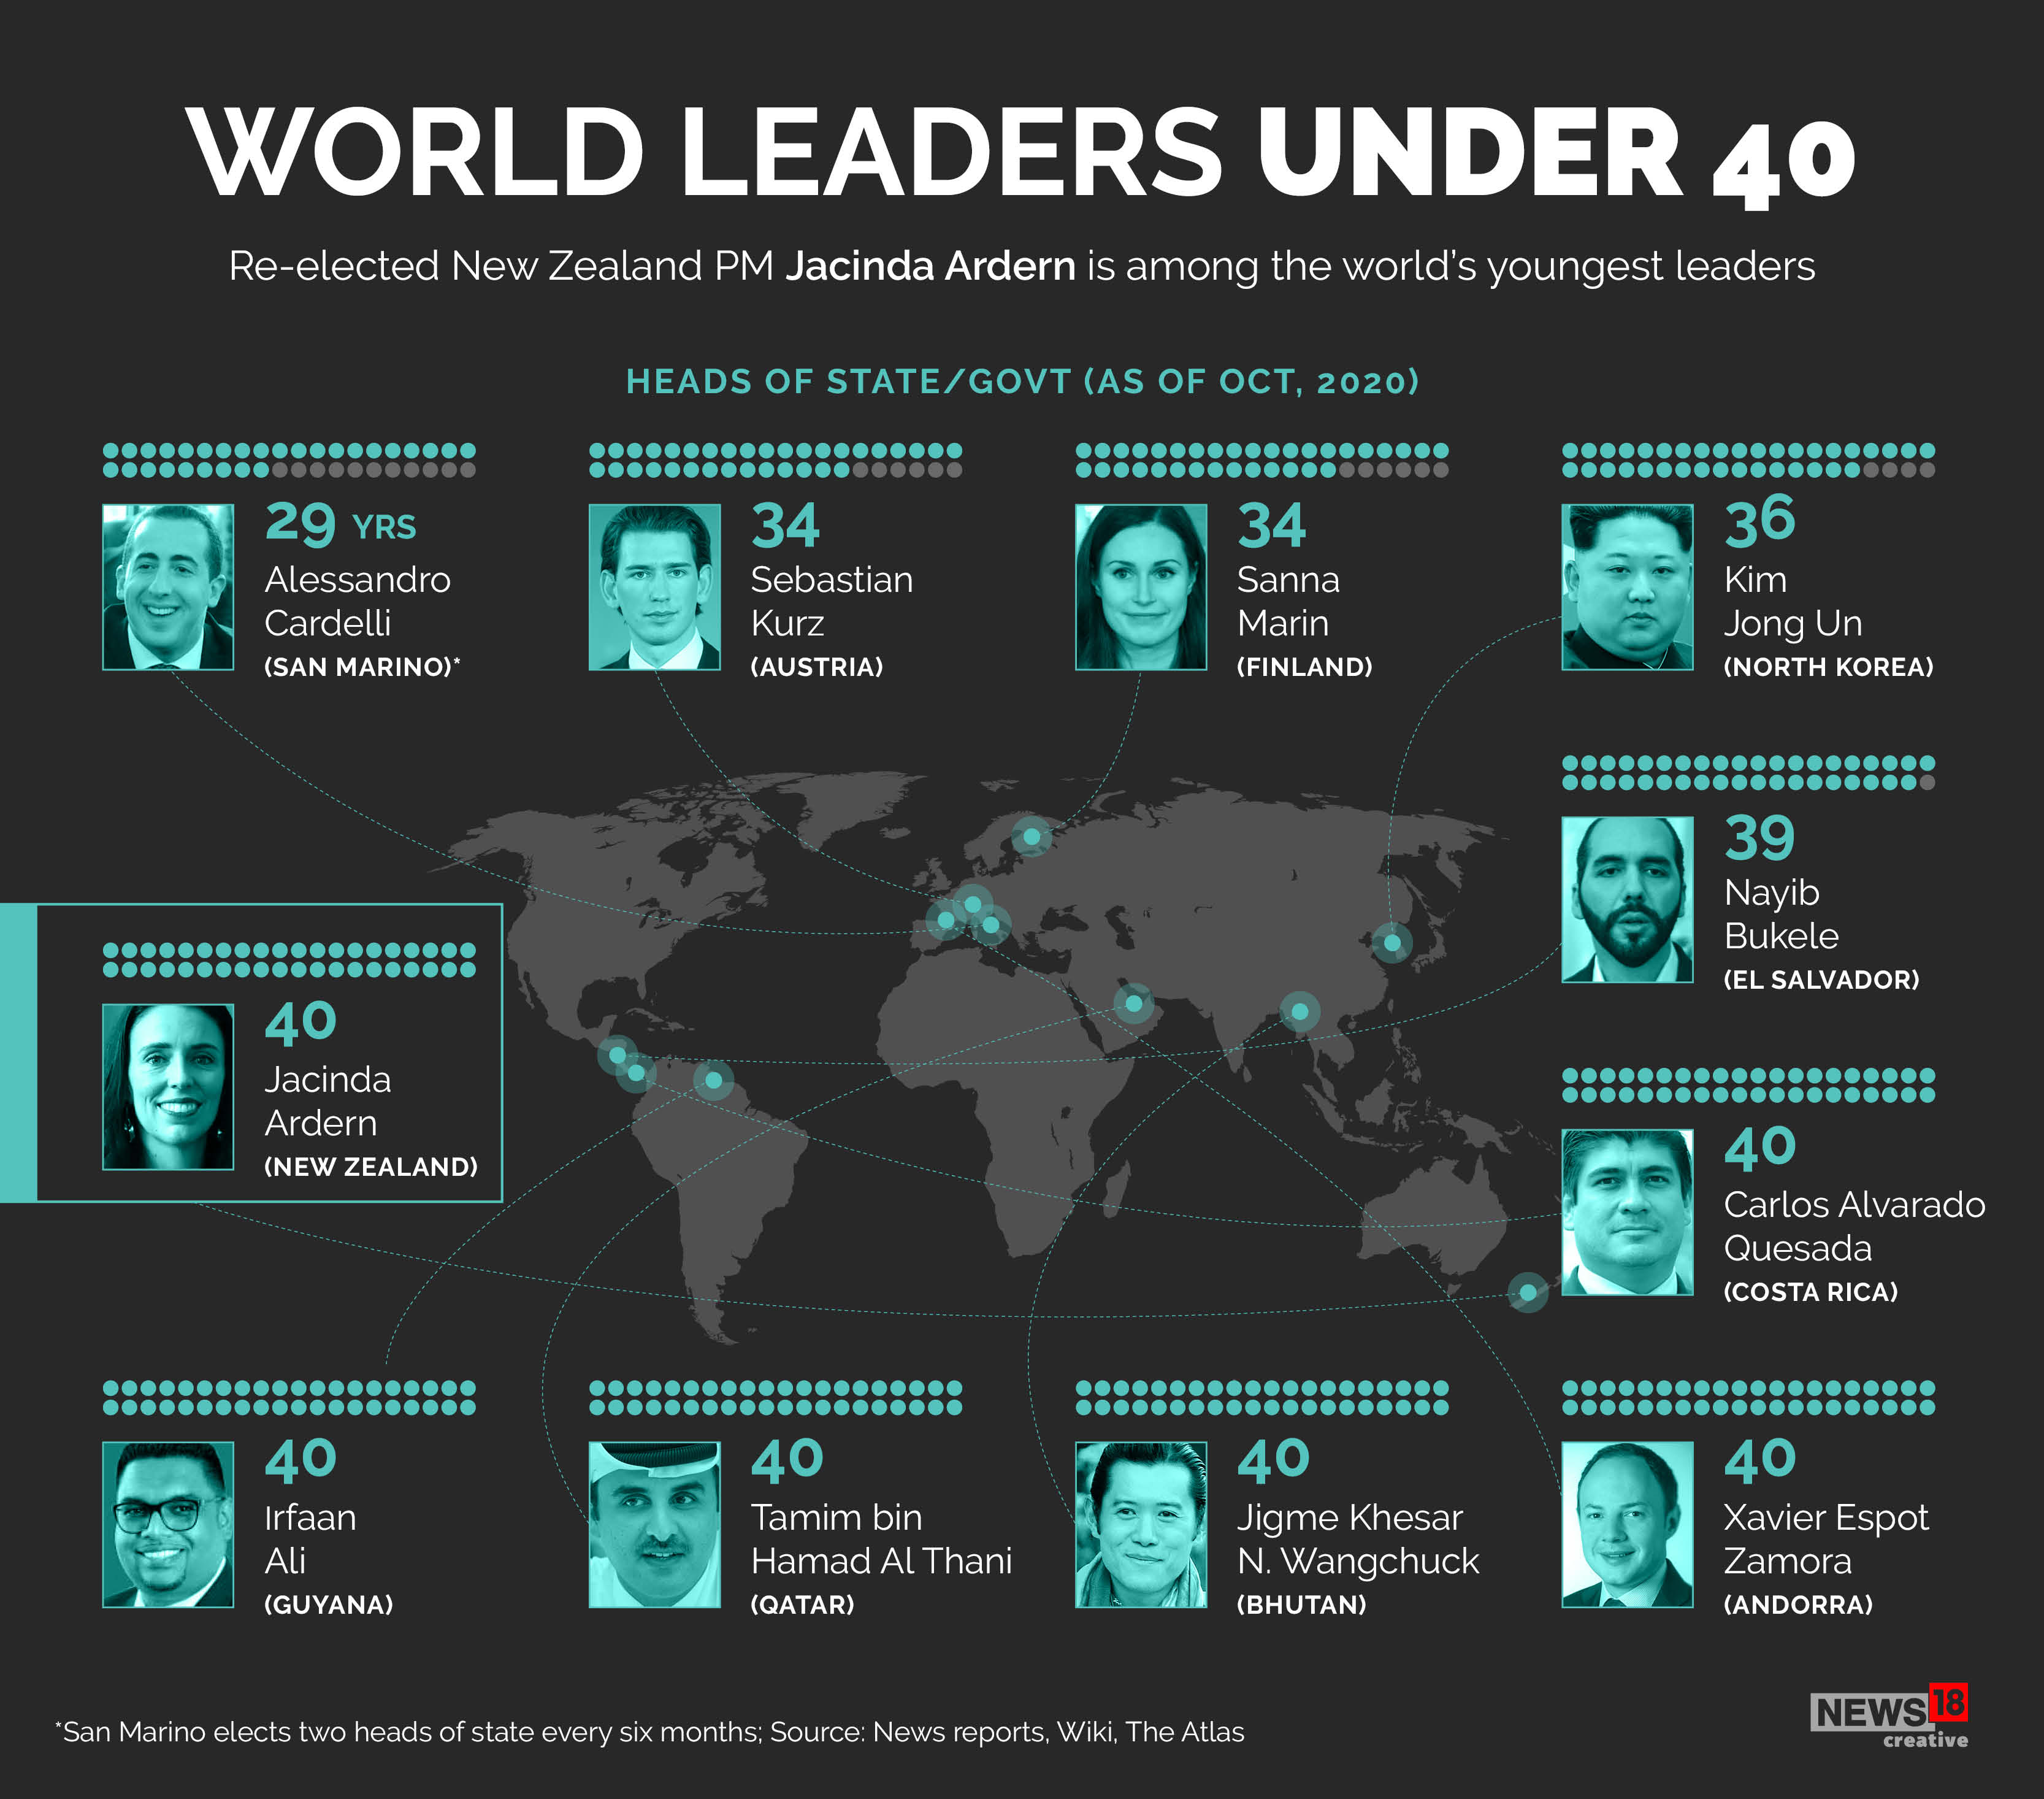 Who are the world's youngest leaders?